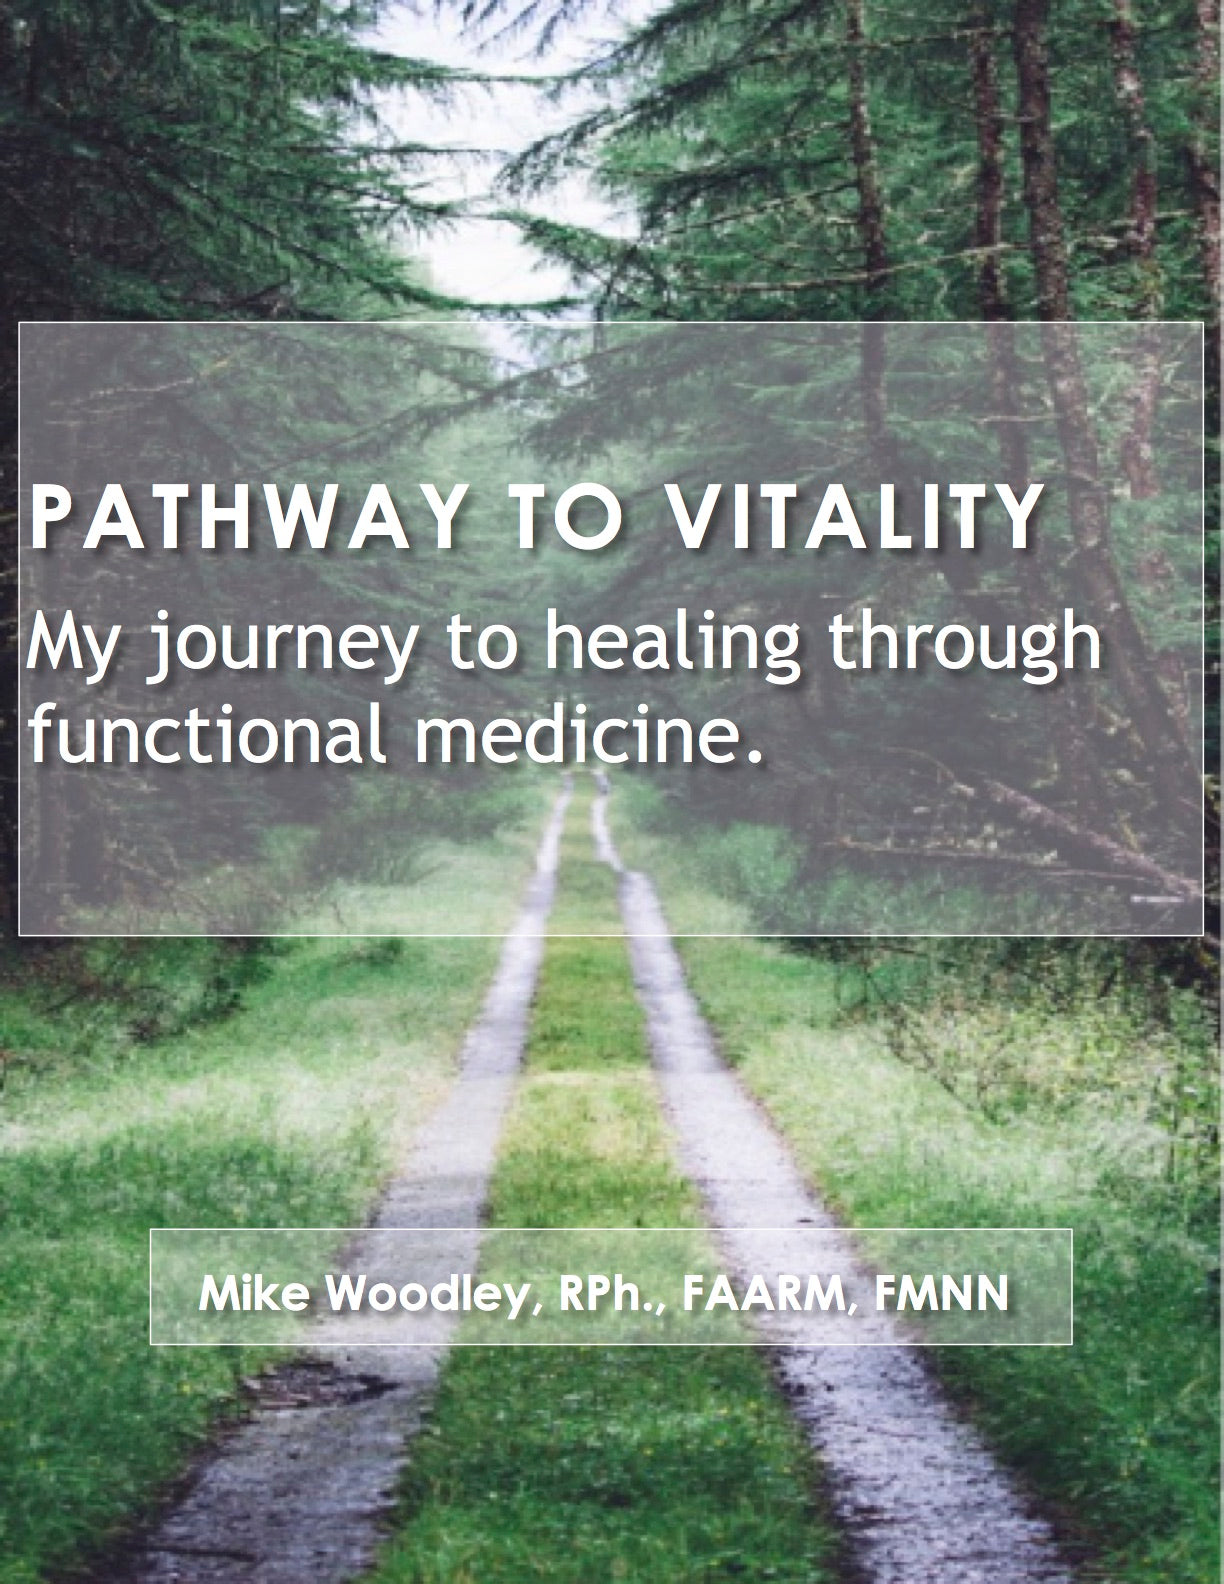 My Journey: Mike's Pathway to Healing